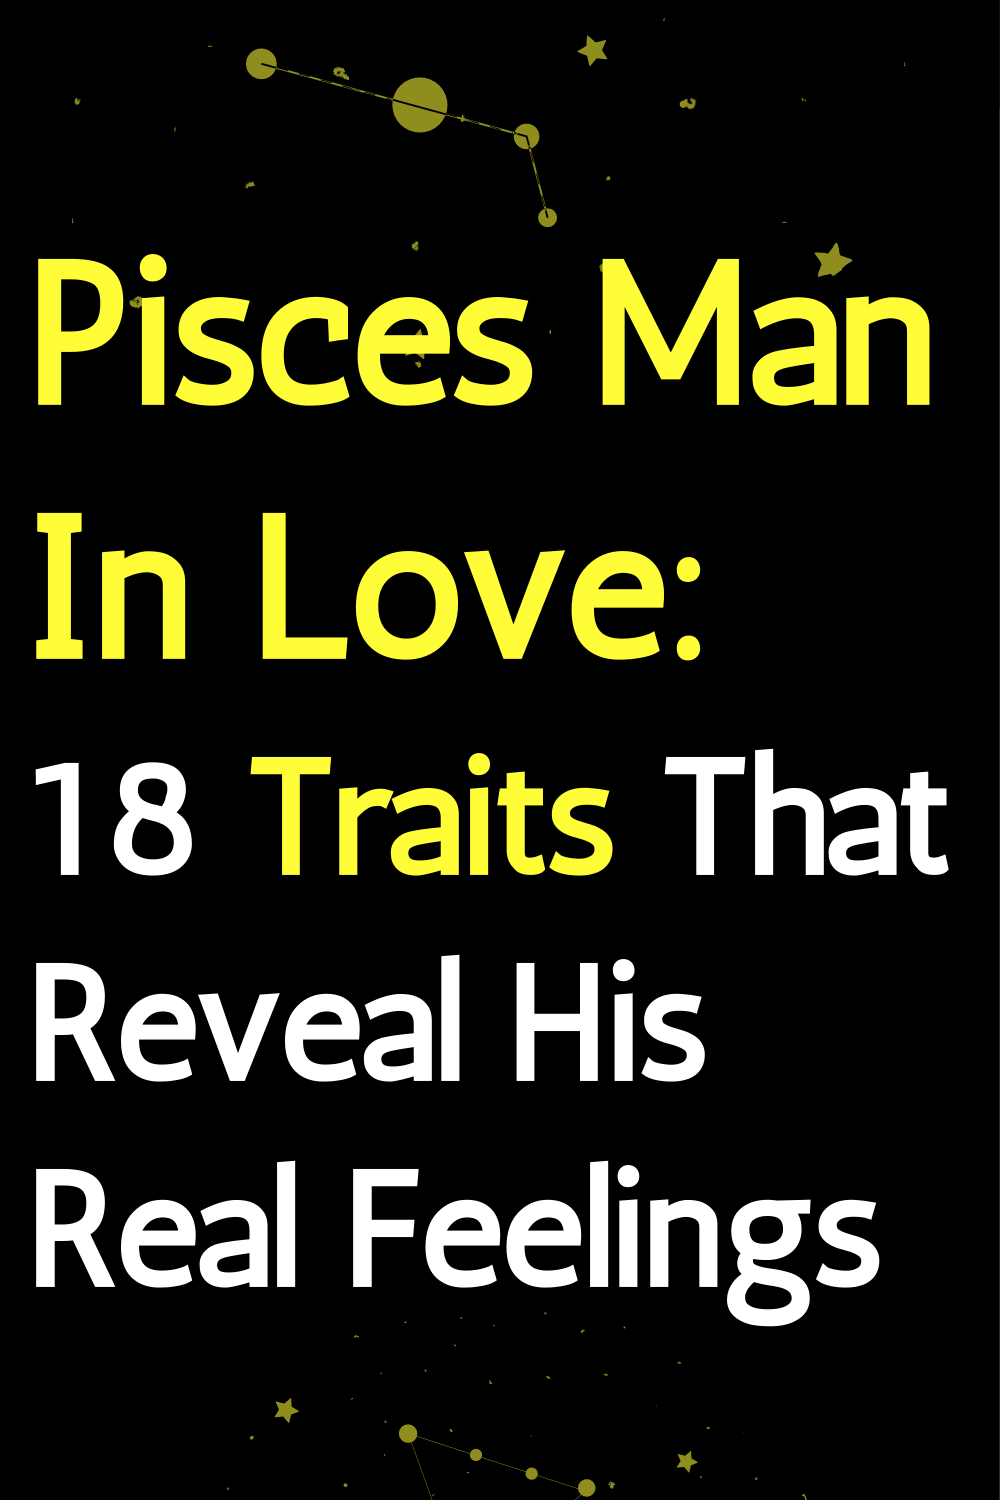 Pisces Man In Love: 18 Traits That Reveal His Real Feelings